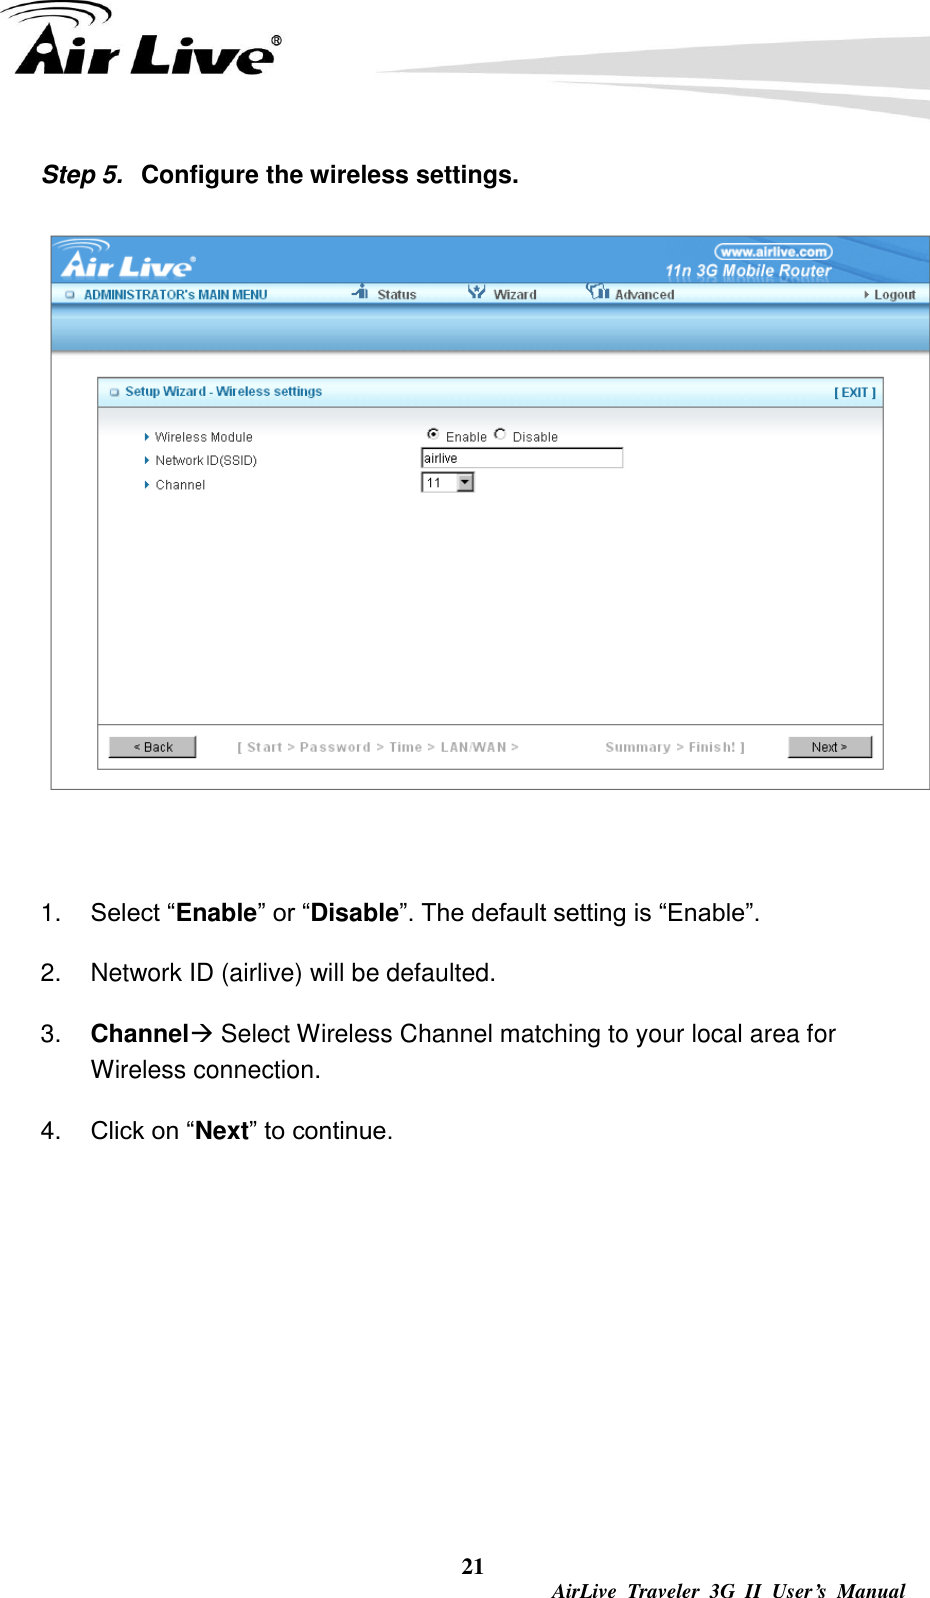  21  AirLive  Traveler  3G  II  User’s  Manual Step 5.  Configure the wireless settings.   1. Select “Enable” or “Disable”. The default setting is “Enable”. 2.  Network ID (airlive) will be defaulted. 3. Channel Select Wireless Channel matching to your local area for Wireless connection. 4. Click on “Next” to continue.       